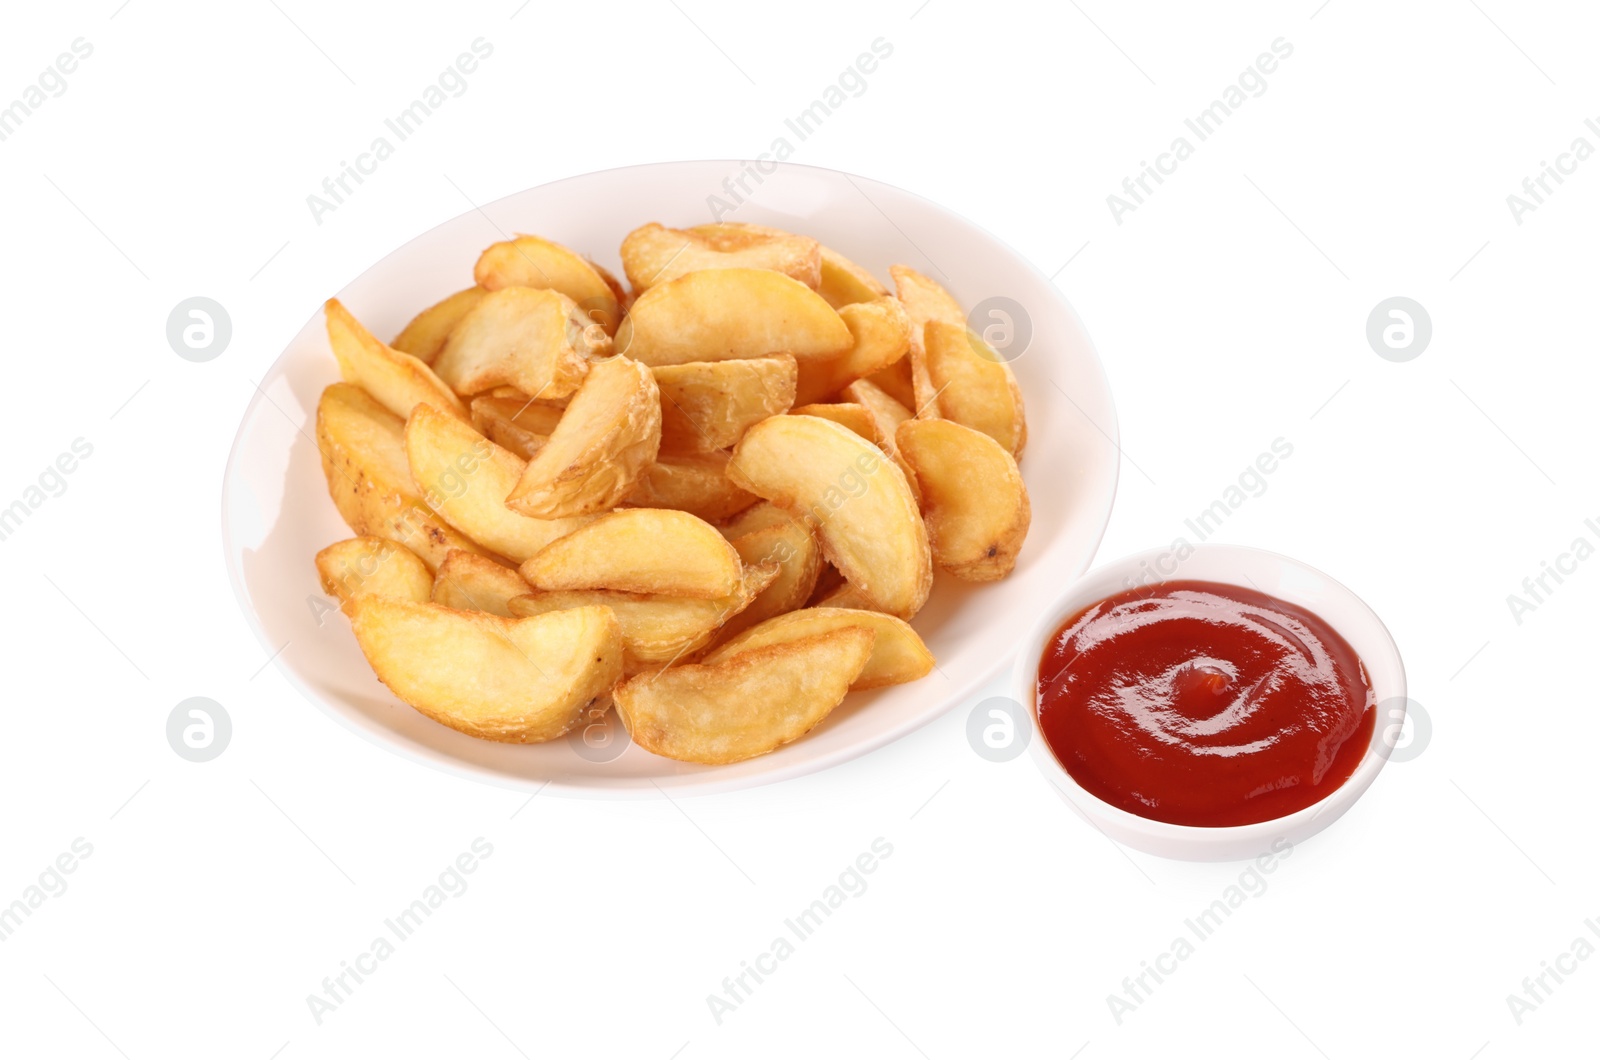 Photo of Delicious baked potato wedges and ketchup in bowl on white background